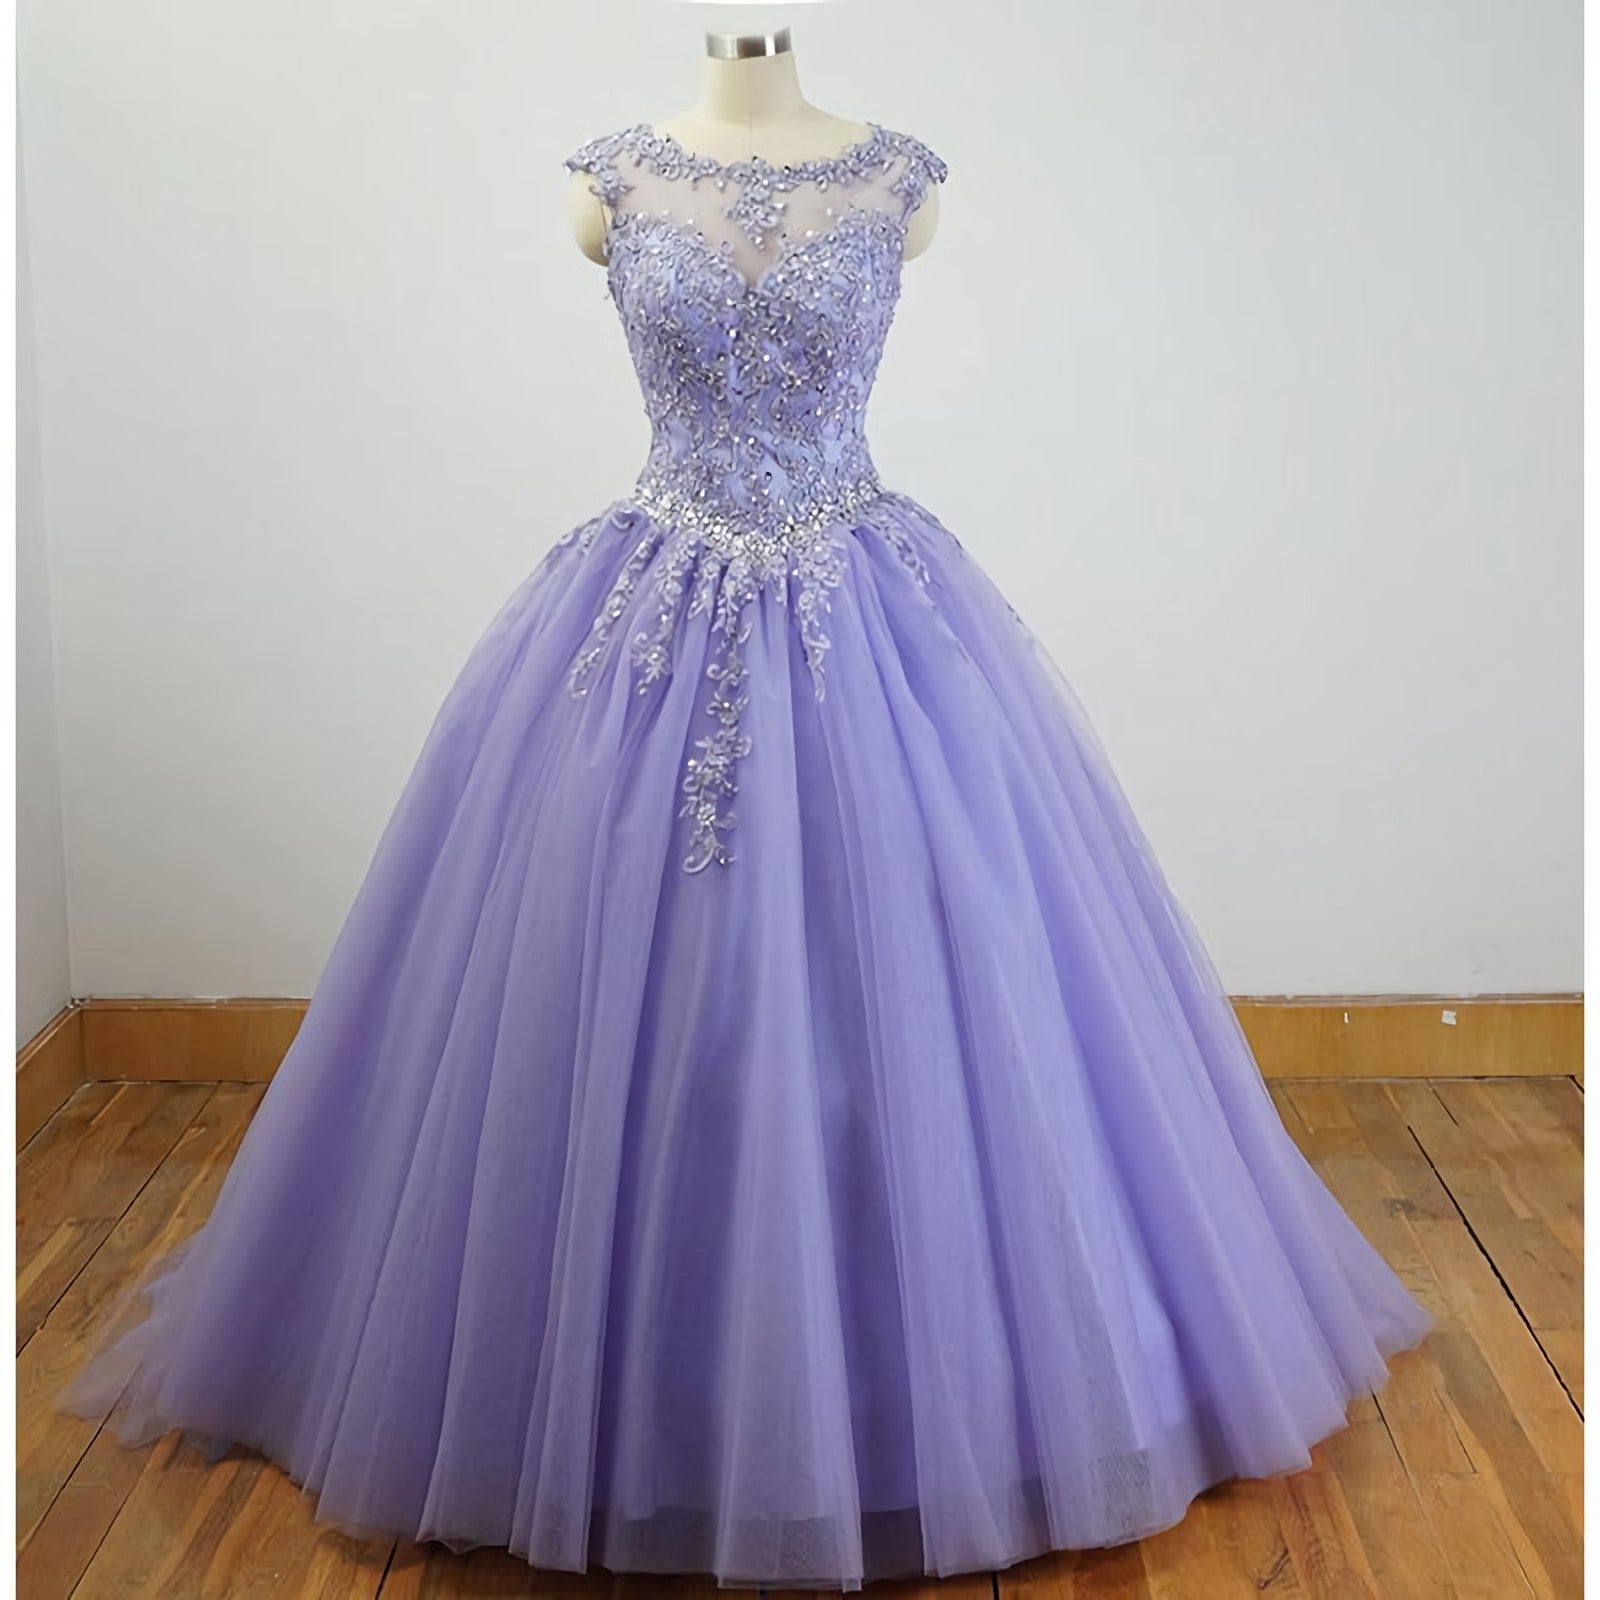 Gorgeous Cap Sleeves Lavender Corset Ball Gown Quinceanera Dresses, Lace Appliqued Beading Bling Bling Sweet 16 Dress, Debutante Gown Corset Prom Dresses outfit, Prom Dress Shop